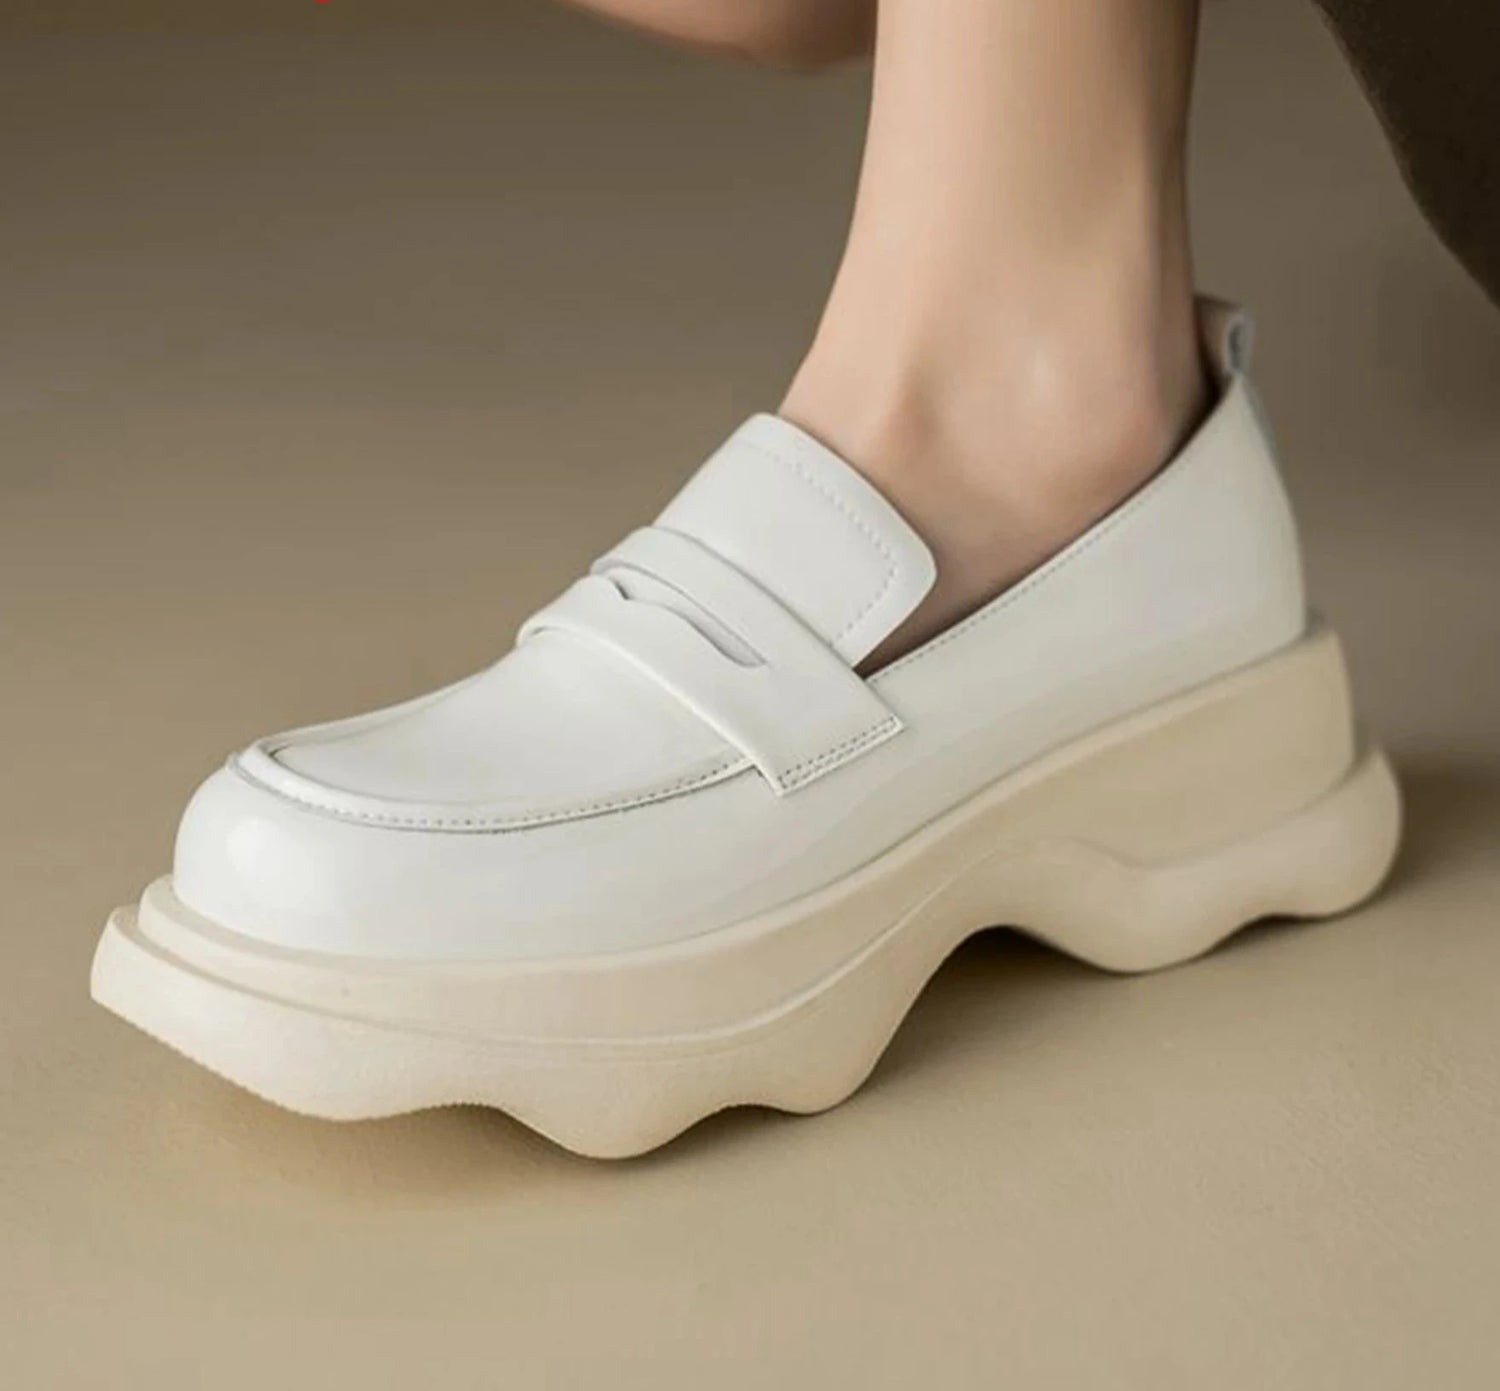 Loafers for woman, Thick Bottom, Round Toe, Casual Women Vulcanized Shoes Luxury Increasing Platform Sneakers KilyClothing